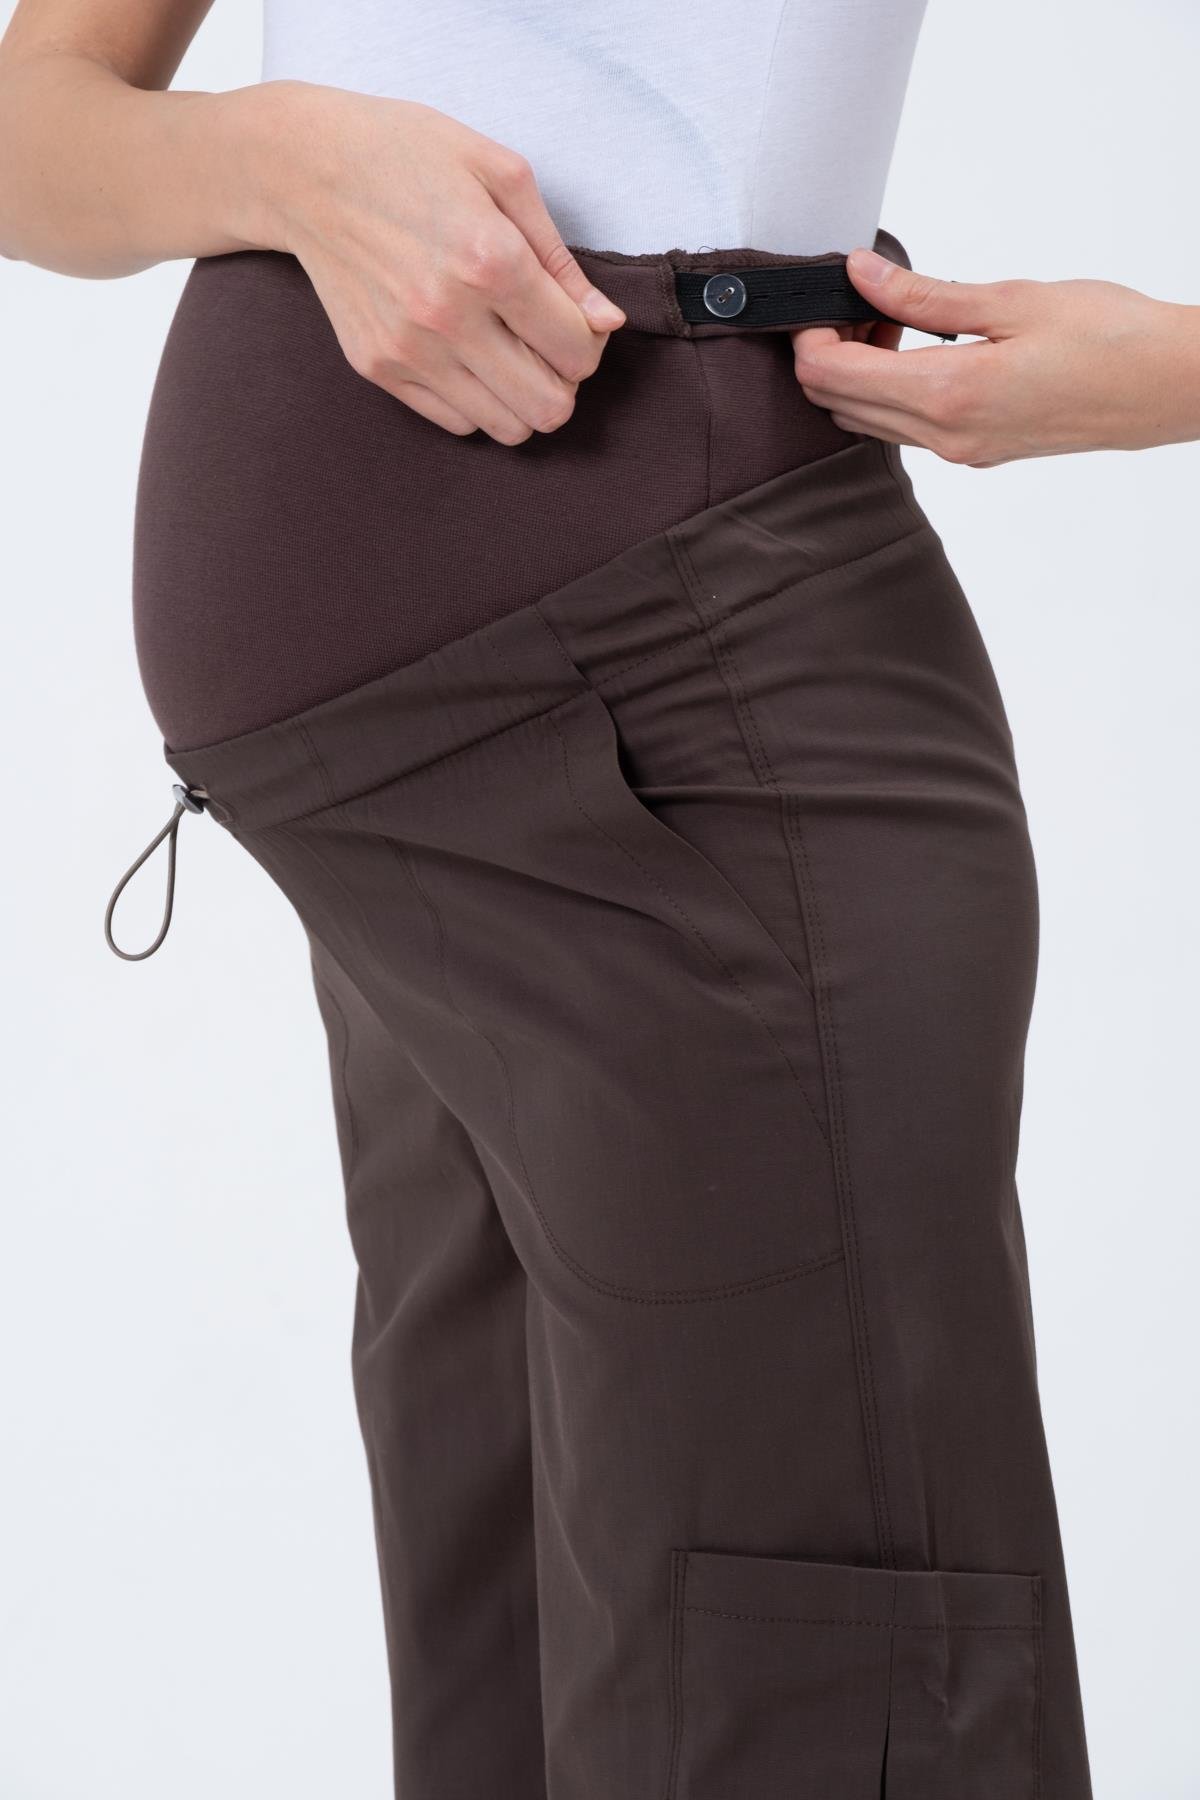 Busa Maternity Flexible Belly Band Waist Adjustable Parachute Fabric Cargo  Pants BROWN